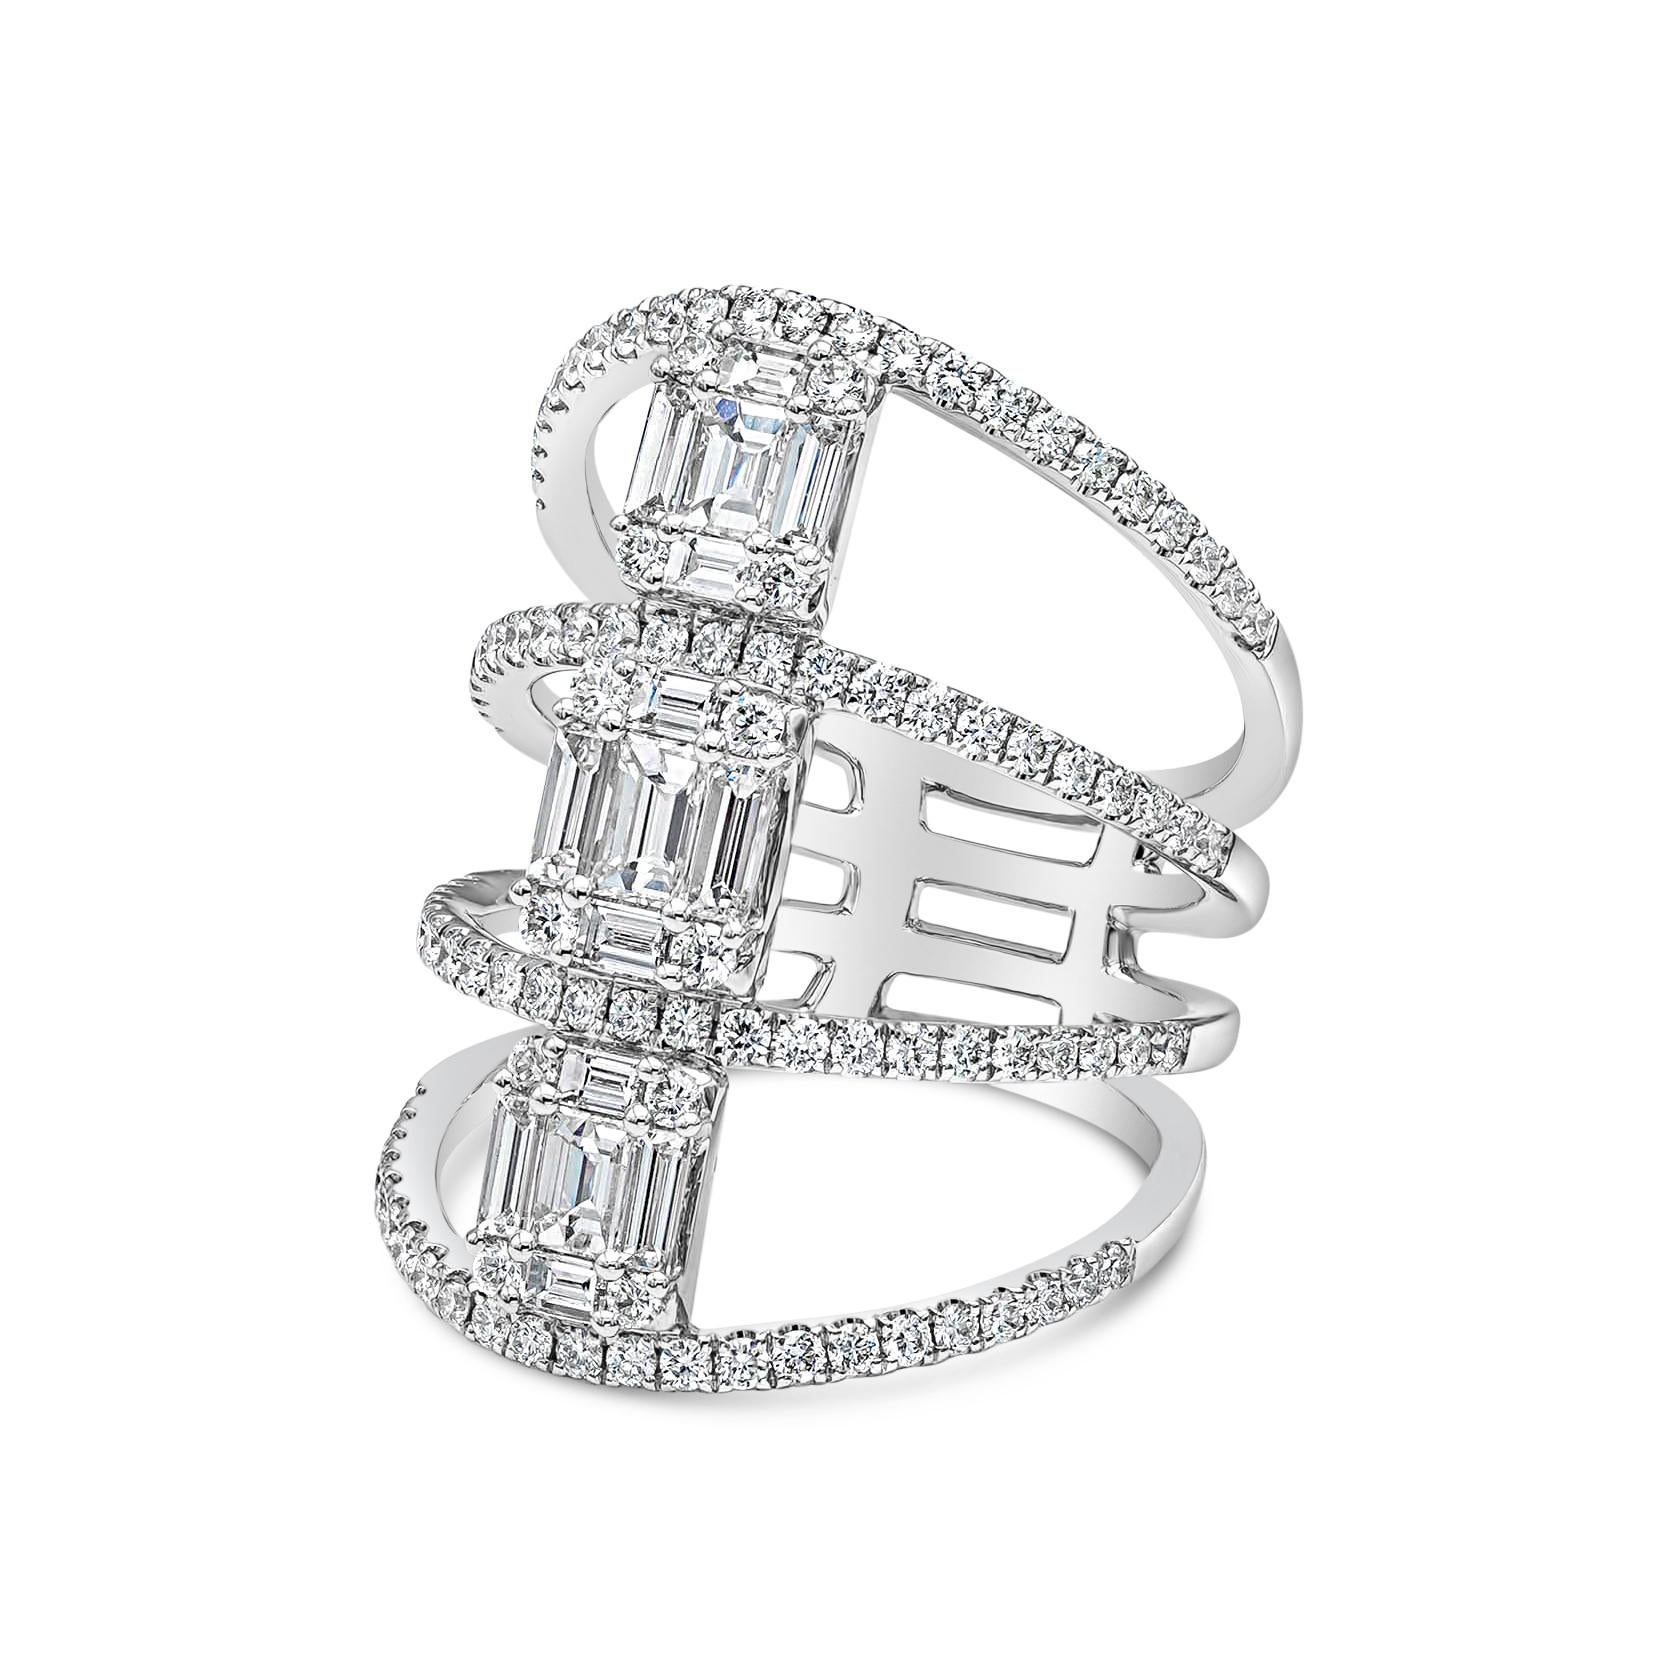 A magnificent fashion ring showcasing four rows of brilliant round diamonds, elegantly spaced by baguette diamonds illusion set like as emerald cut. Round diamonds weighs 0.90 carats, G Color and Vs in Clarity. Baguette diamonds weighs 1.12 carats,